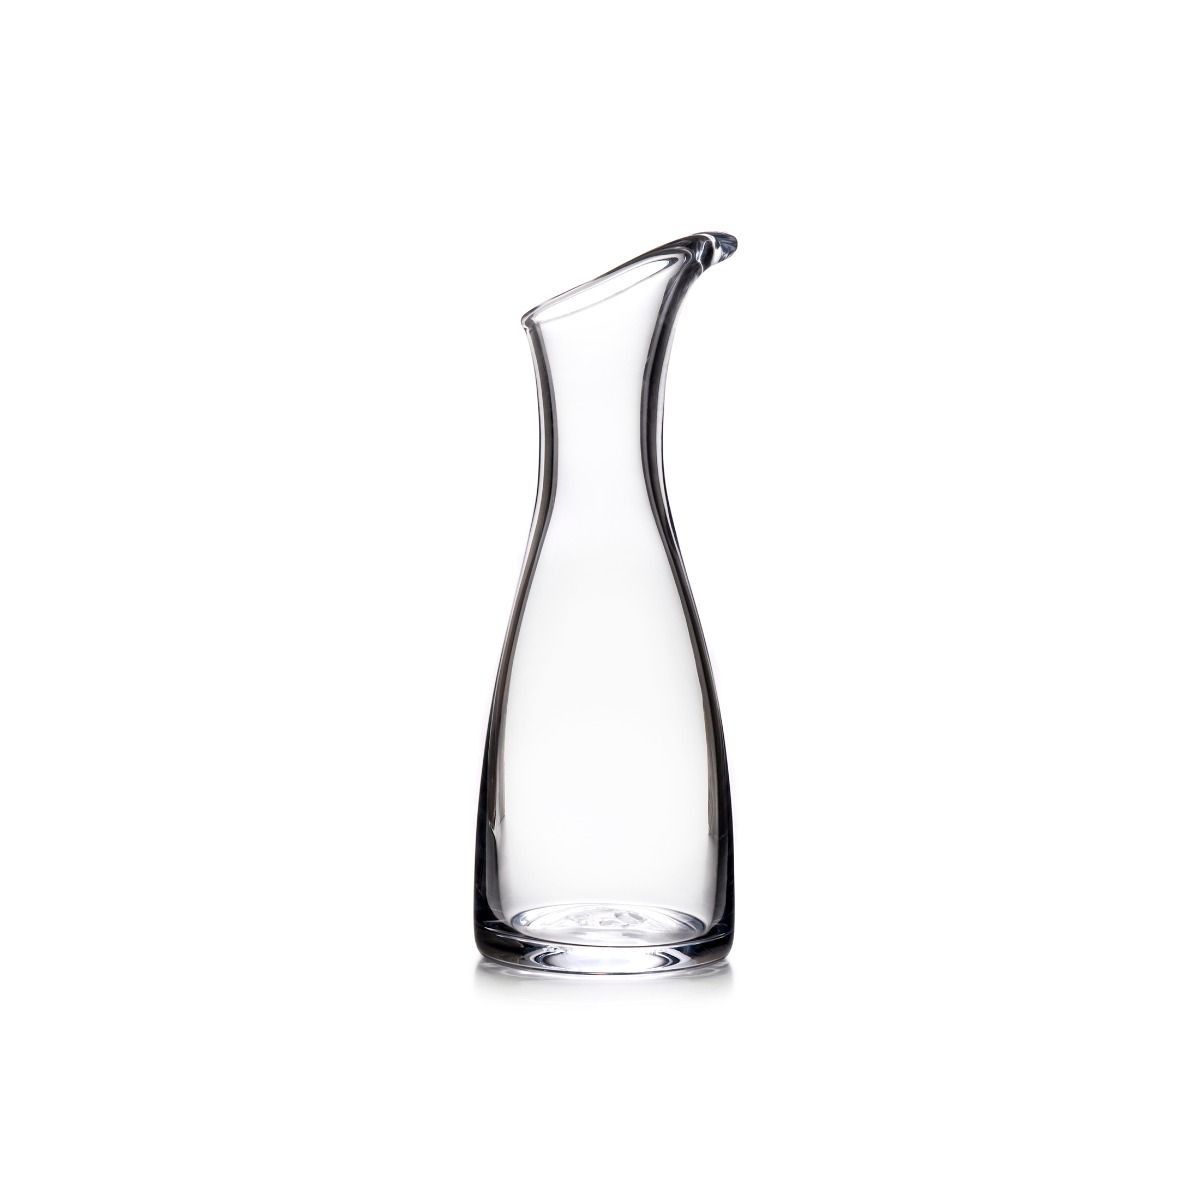 SIMON PEARCE CARAFE BARRE (Available in 3 Sizes)